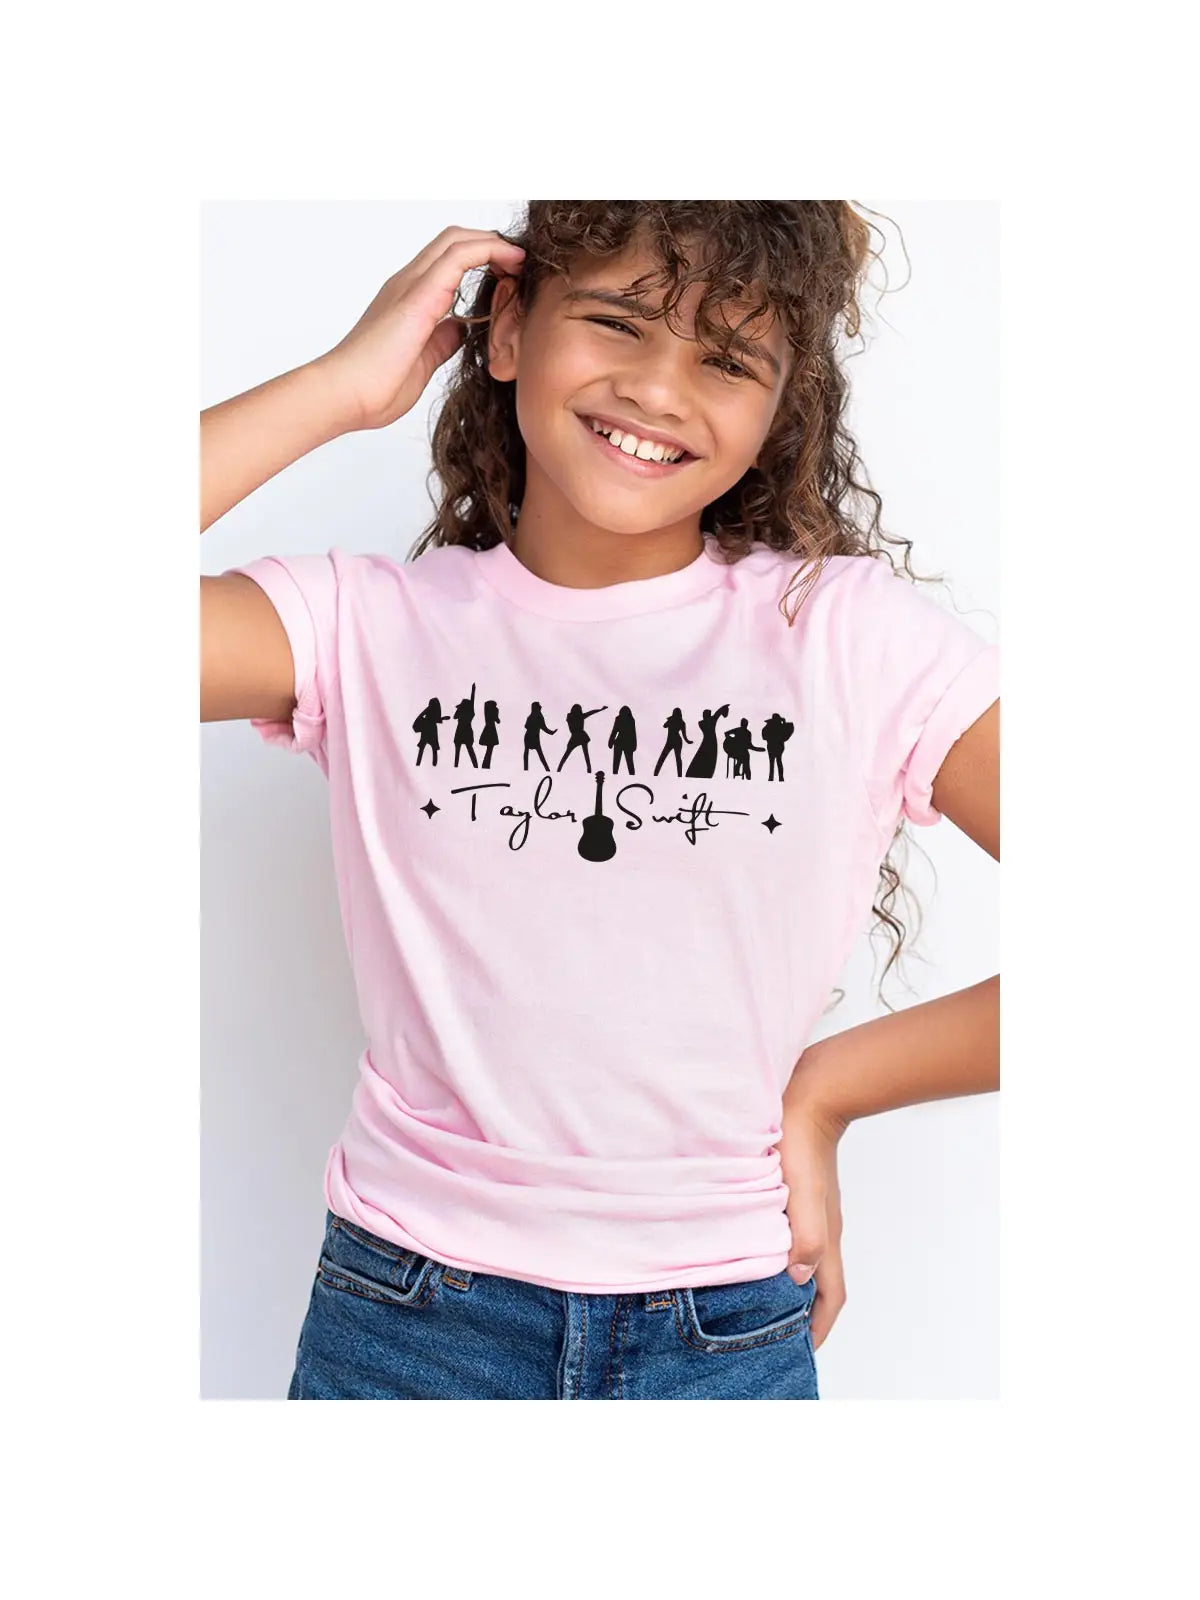 Taylor Swift Silhouettes Tee Cover